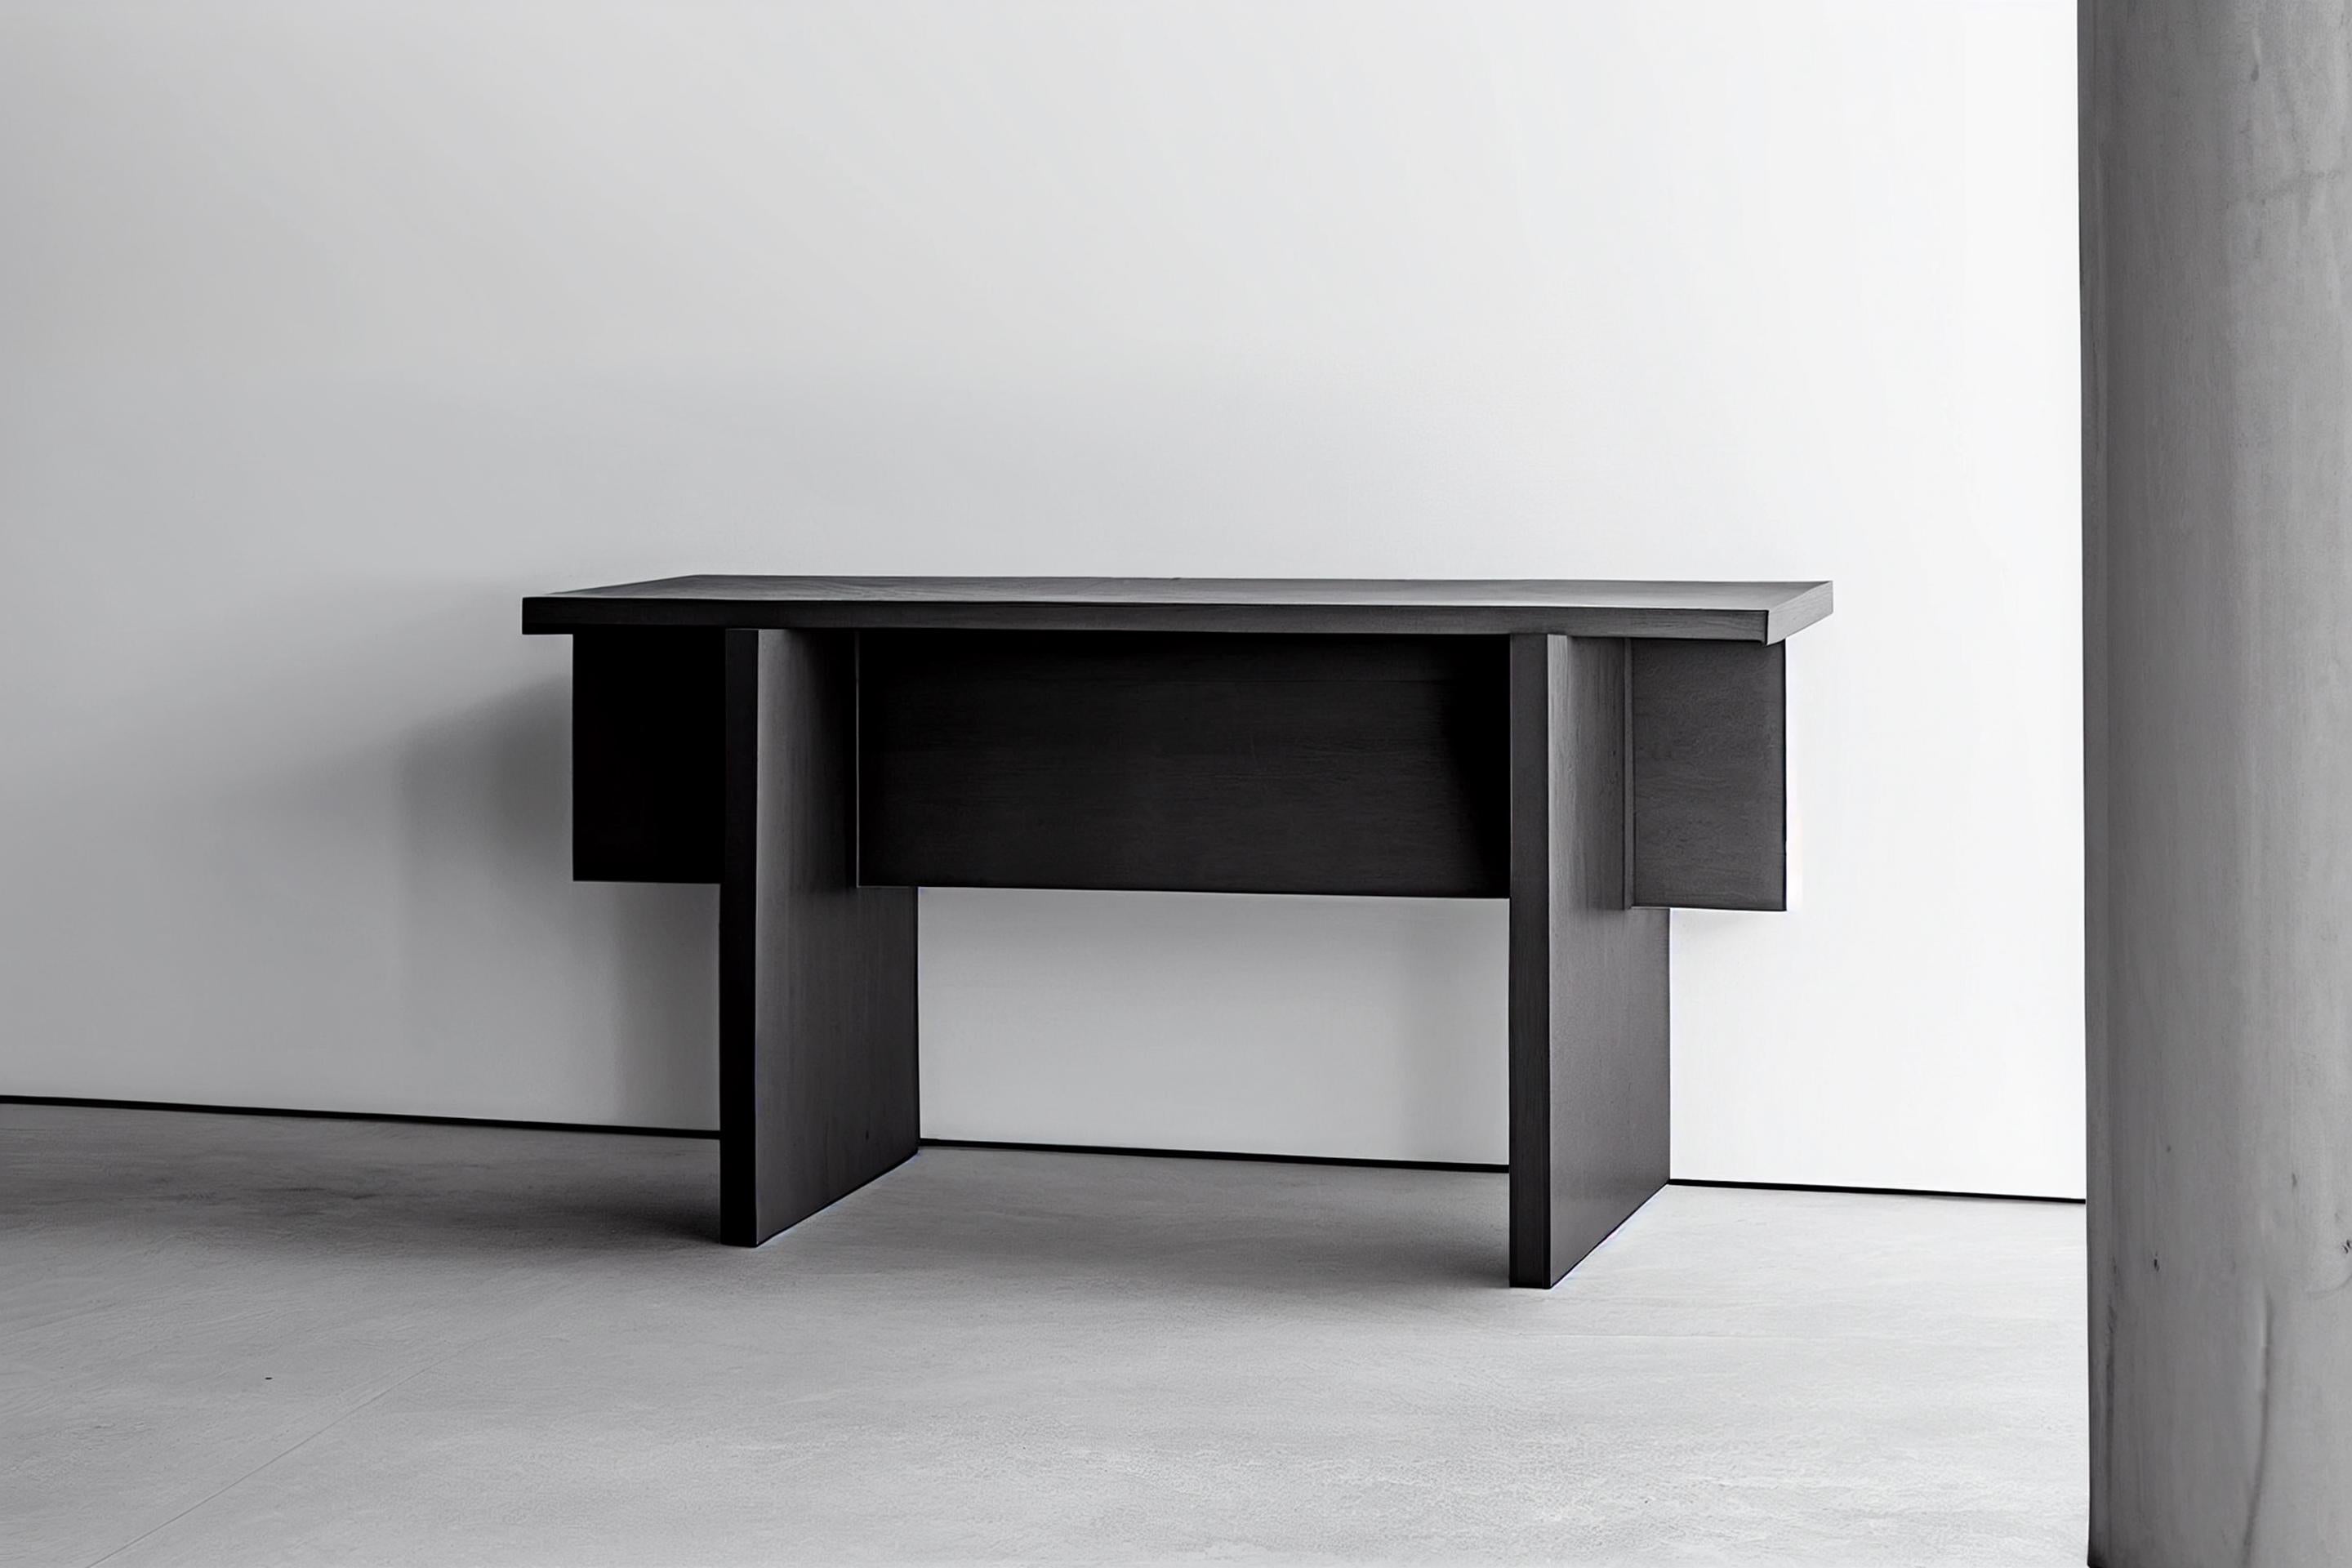 Painted Minimal Console Table, Sideboard Made of Black Tinted Oak Wood, Narrow Console For Sale